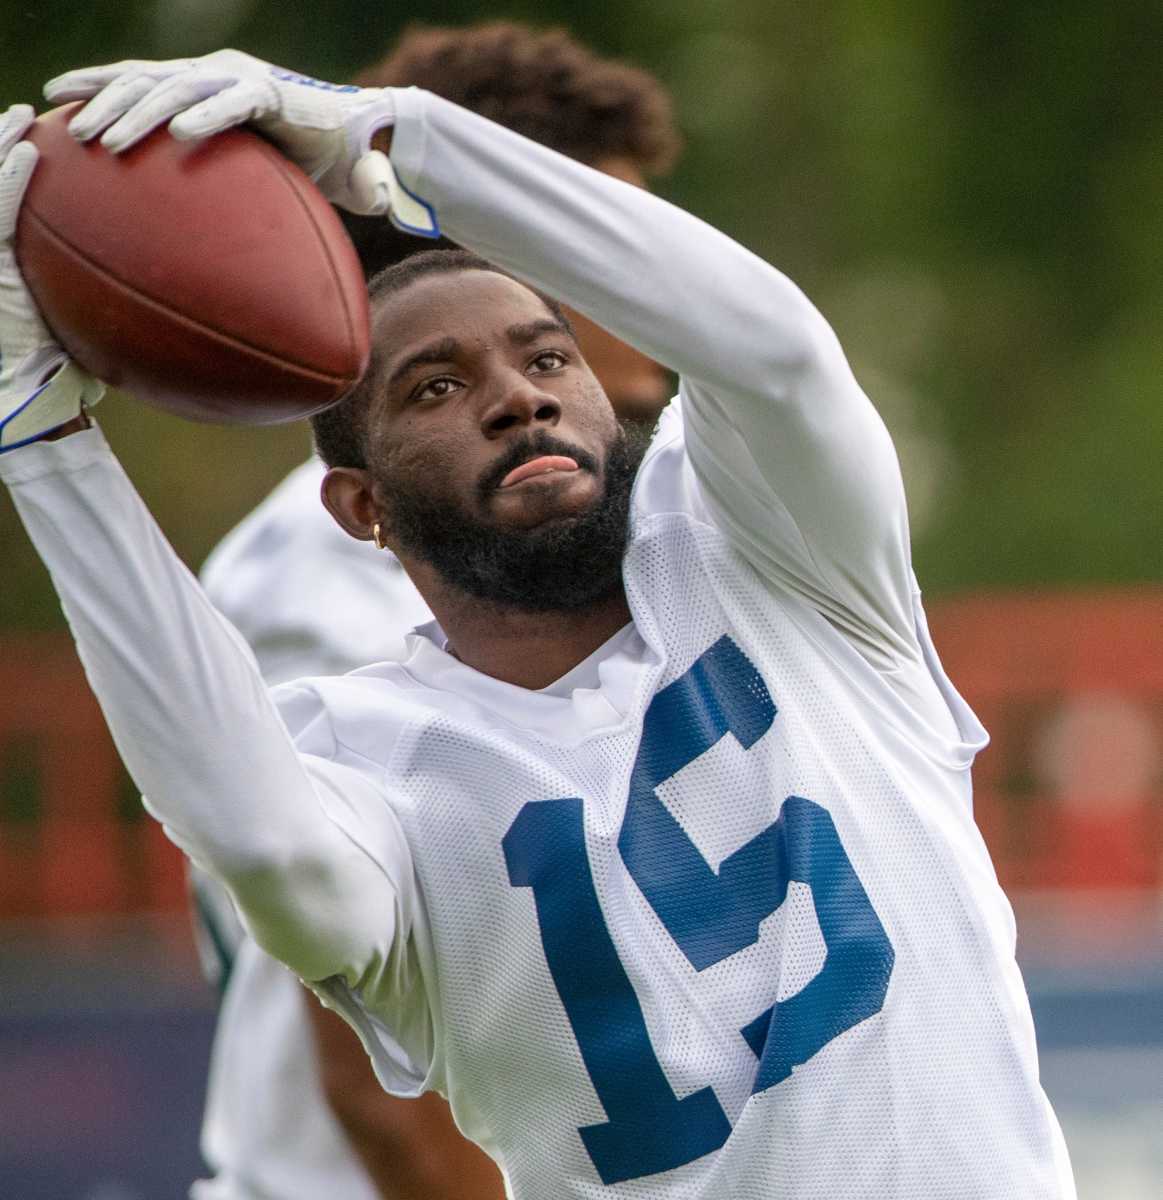 Indianapolis Colts wide receiver J.J. Nelson (15) at the start of practice at Grand Park in Westfield on Thursday, July 29, 2021, on the second full day of workouts of this summer's Colts training camp. Colts Camp Revs Up